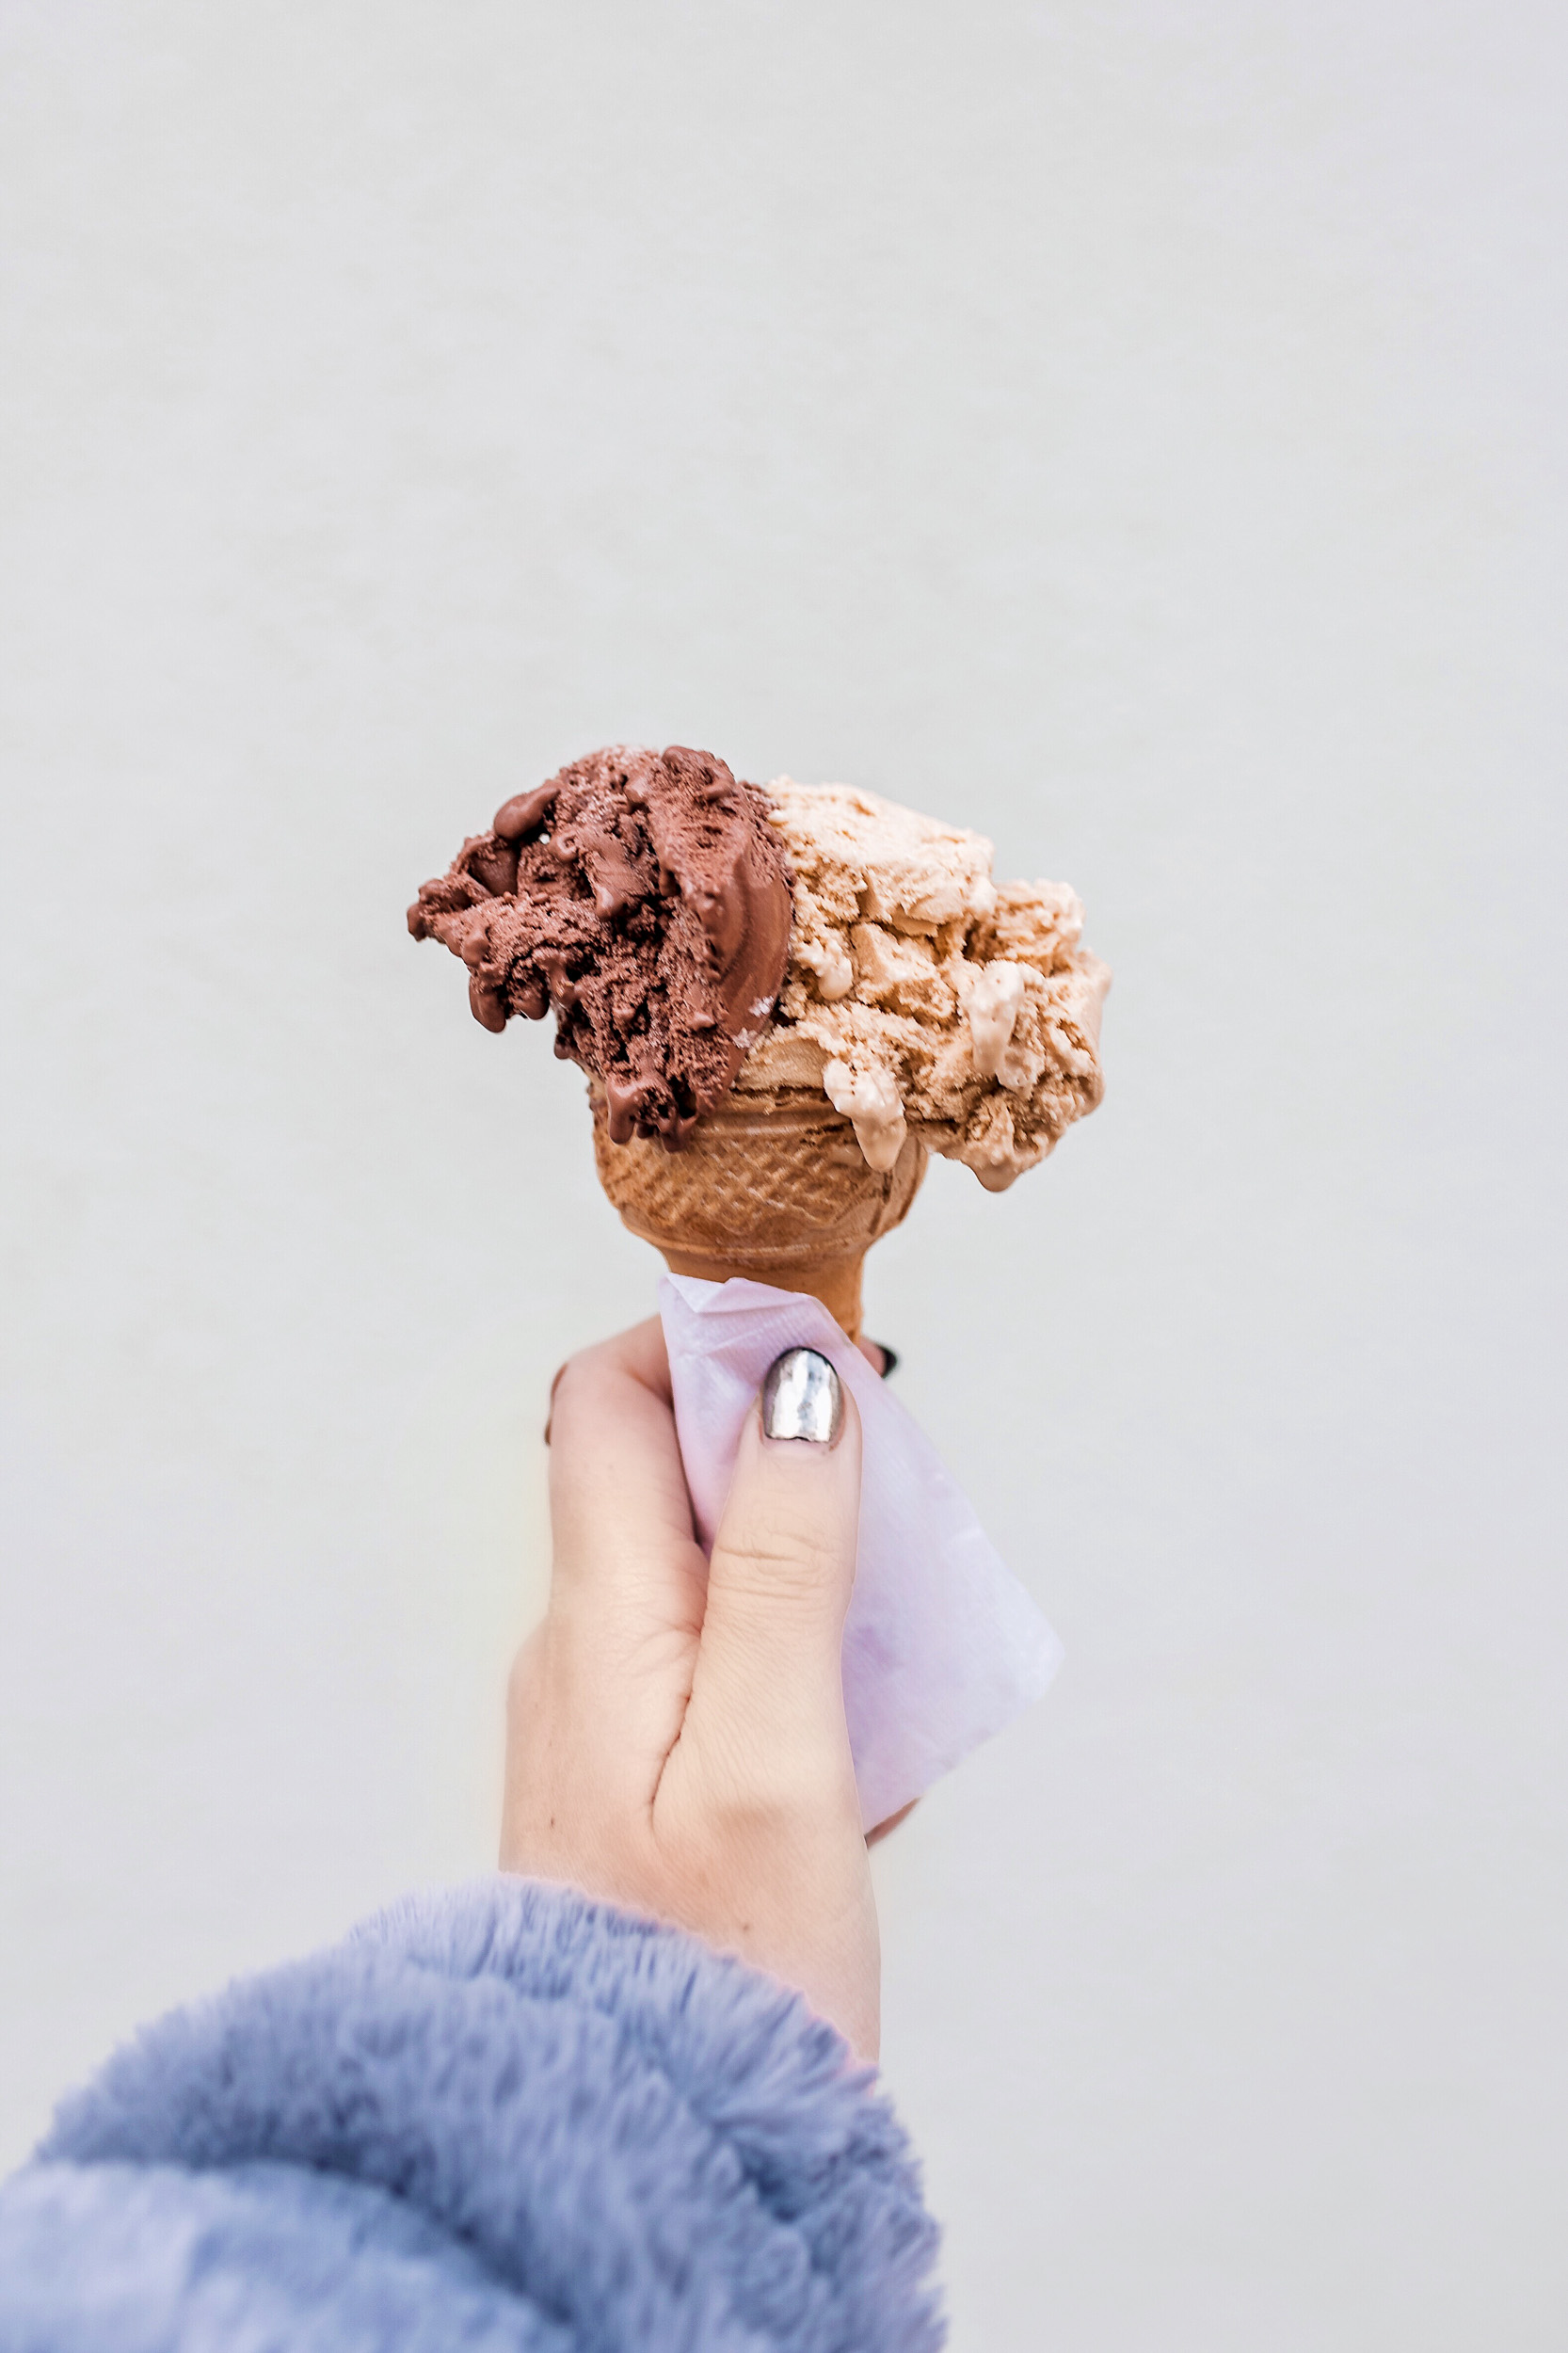 Nannarella: The best gelato in Lisbon! Made with premium ingredients and free of preservatives. 